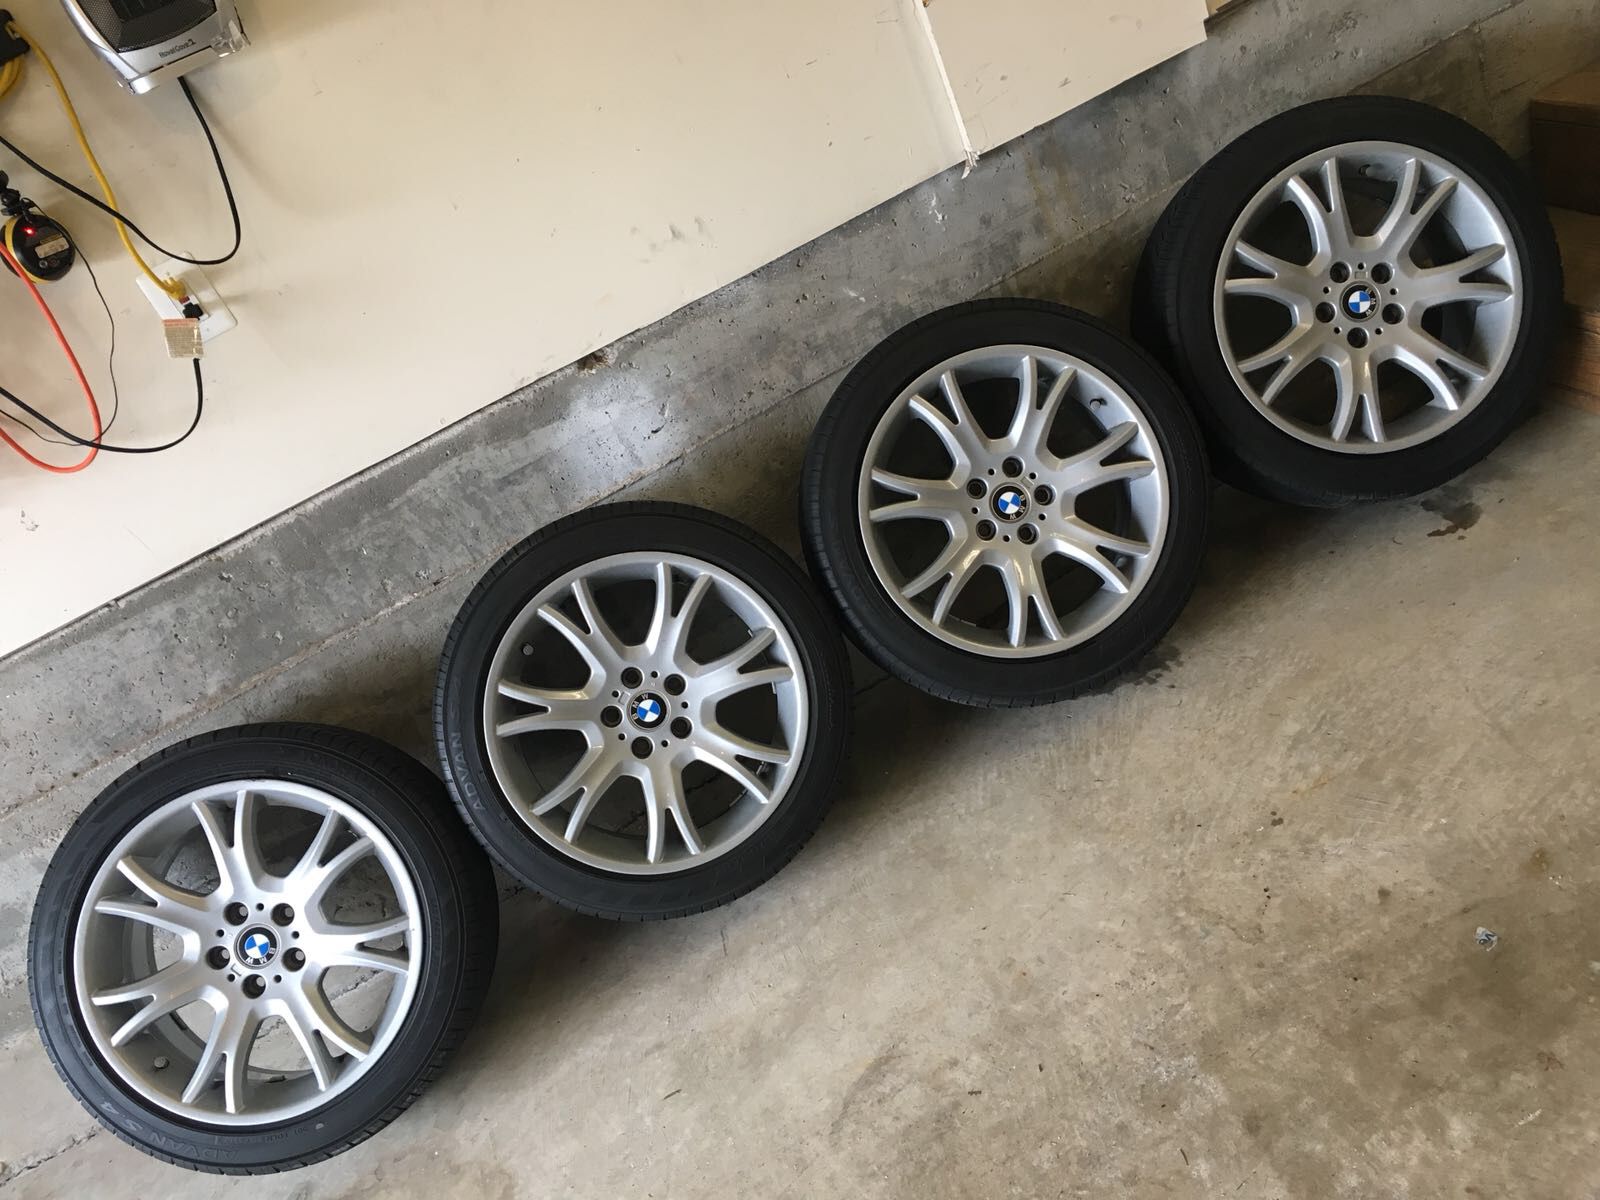 BMW 19” Rims and Tires